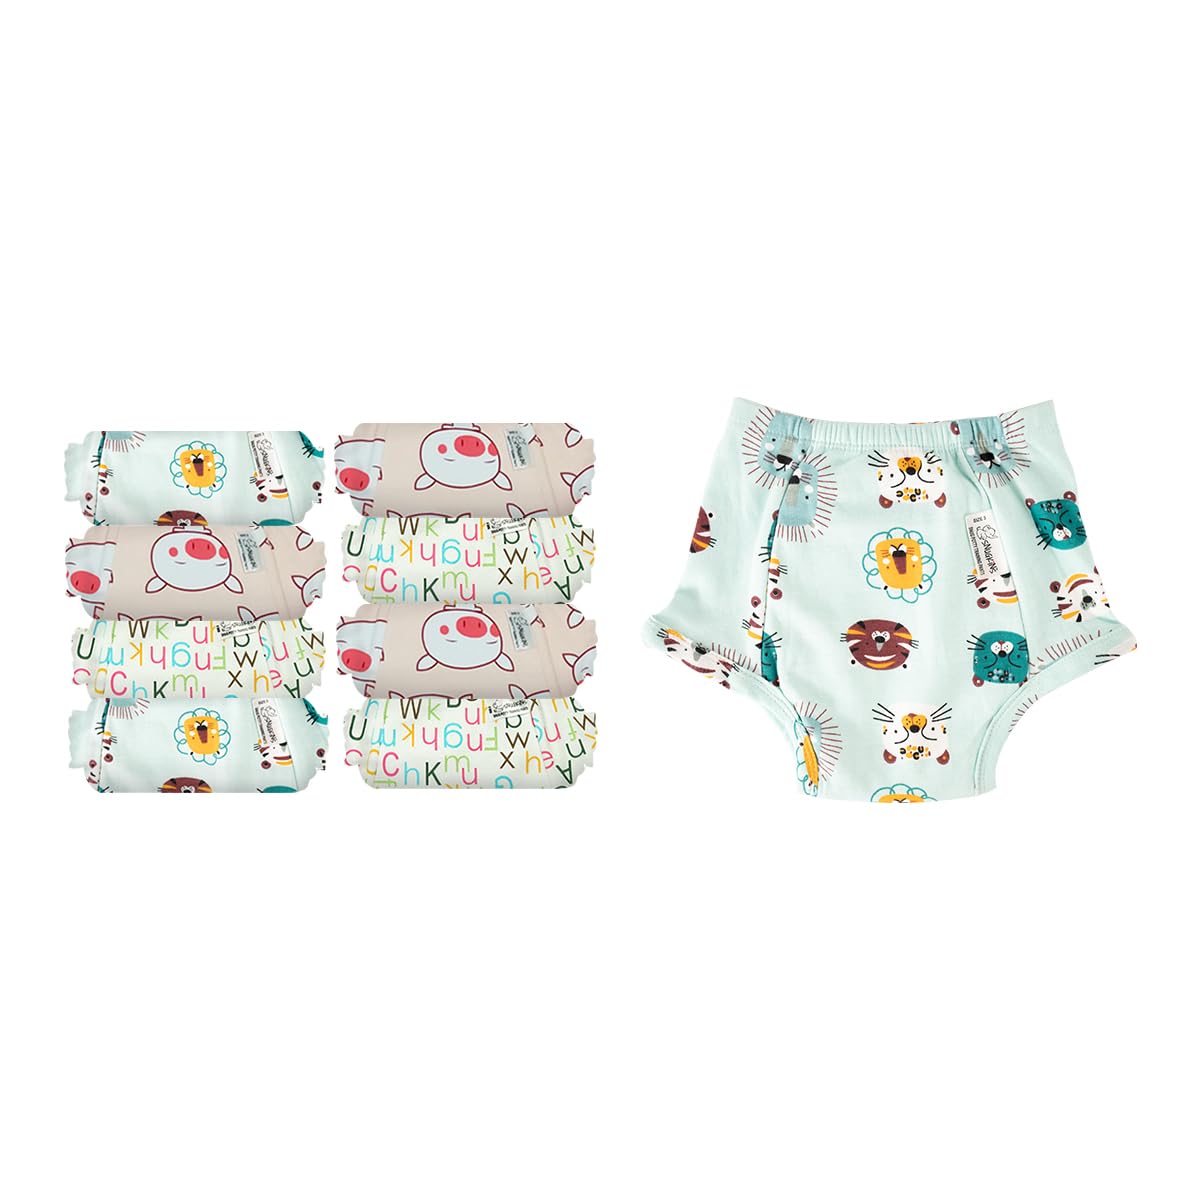 Snugkins - Snug Potty Training Pull-up Pants for Babies/ Toddlers/Kids.  Reusable Potty Training Underwear for Girls and Boys. 100% Cotton. (Size 1,  Fits 1 - 2 years) - Pack of 2 - Kindergarten Tales